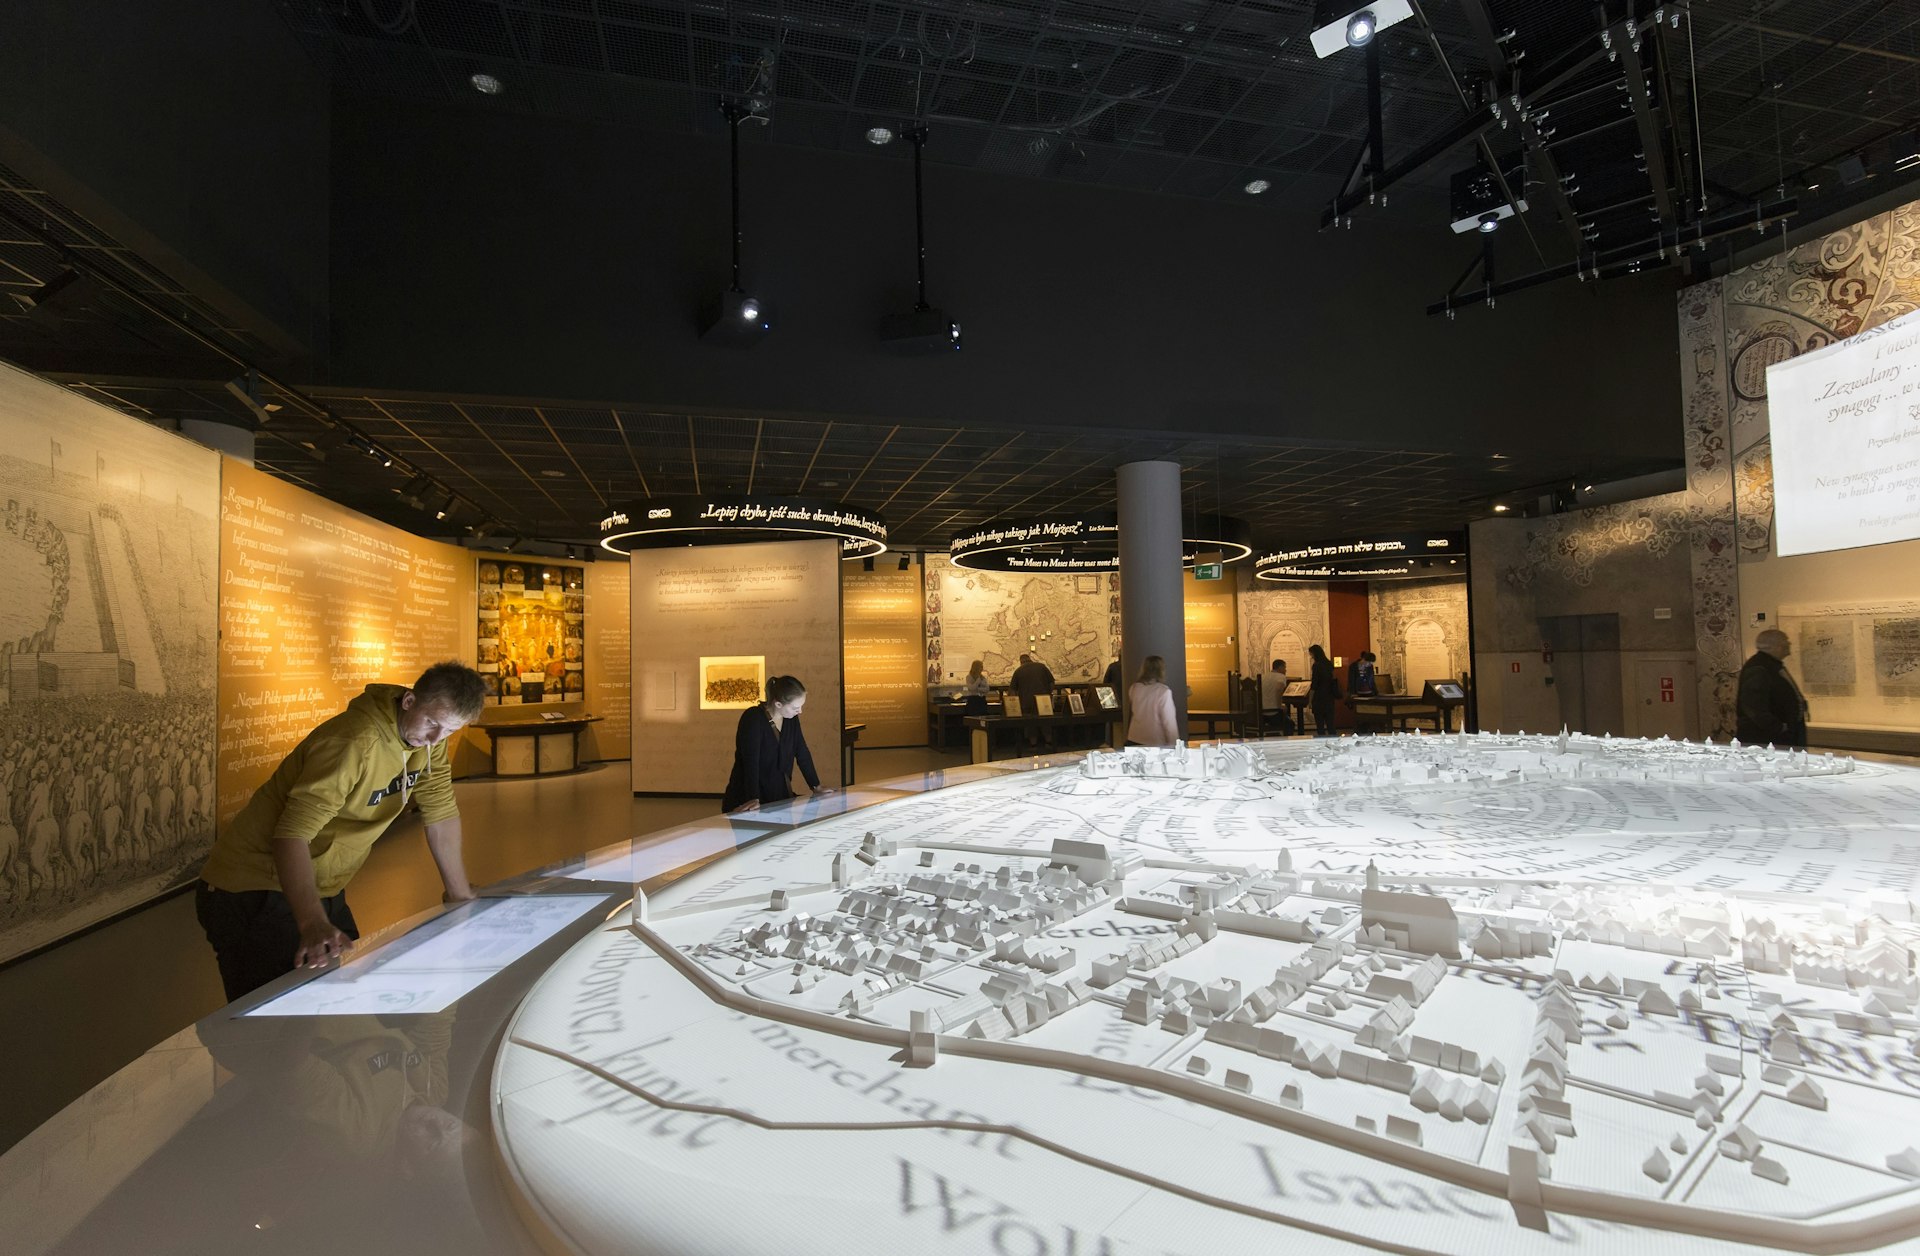 Many people are looking at the interactive exhibits inside Inside the Museum of the History of Polish Jews (POLIN) 